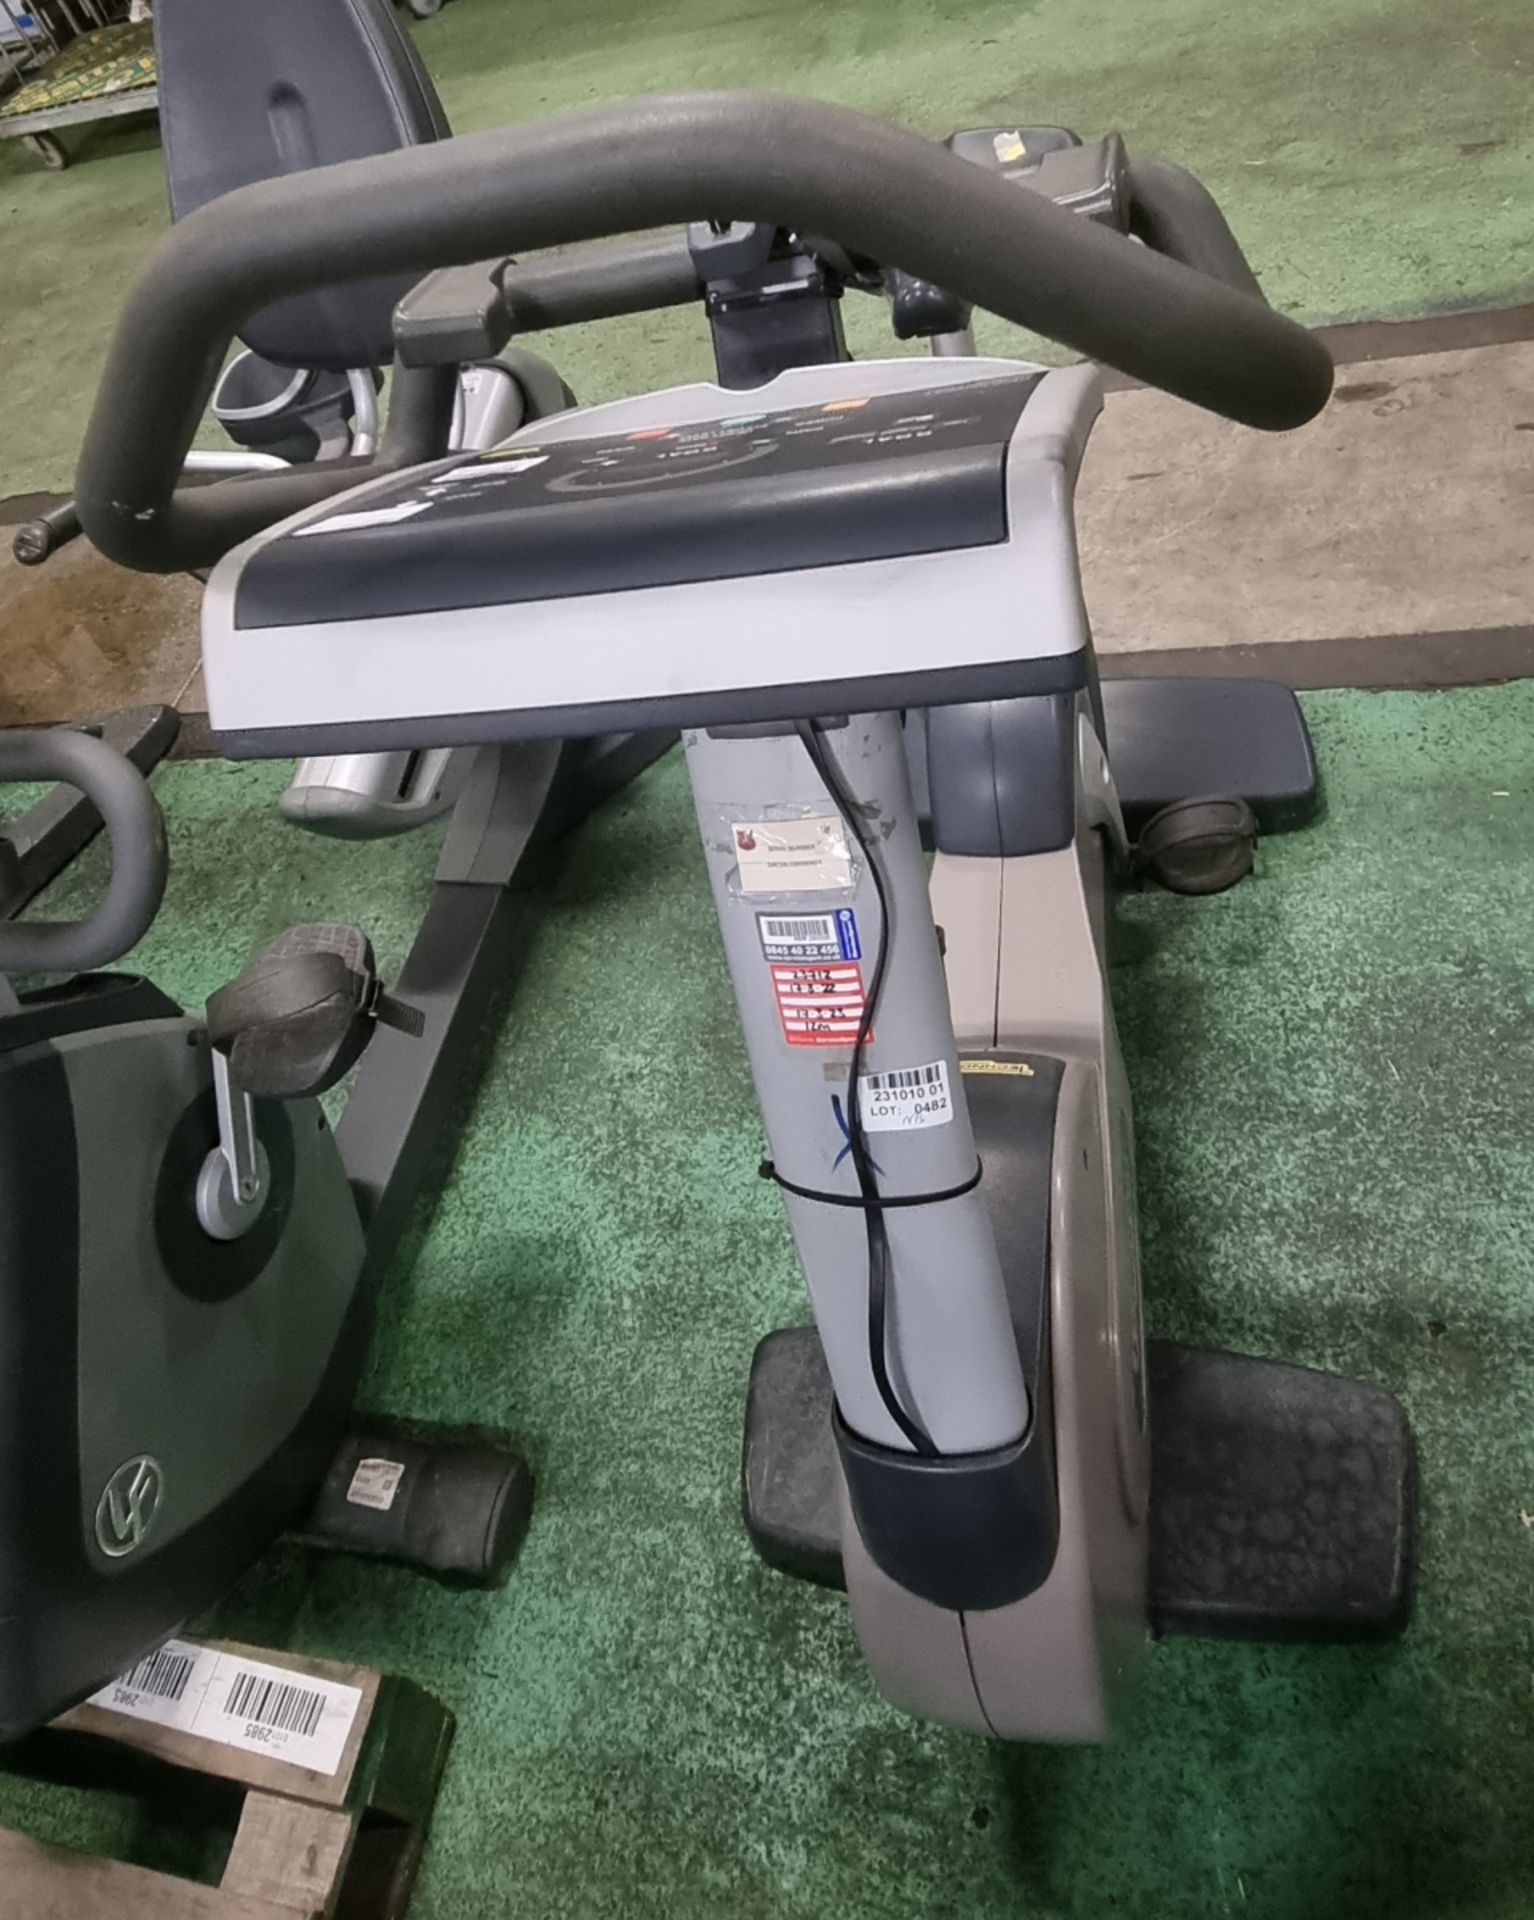 TechnoGym D4CS4LNA New Bike EXC 500 SP - L 2620 x W 600 x H 1340mm - Image 5 of 5